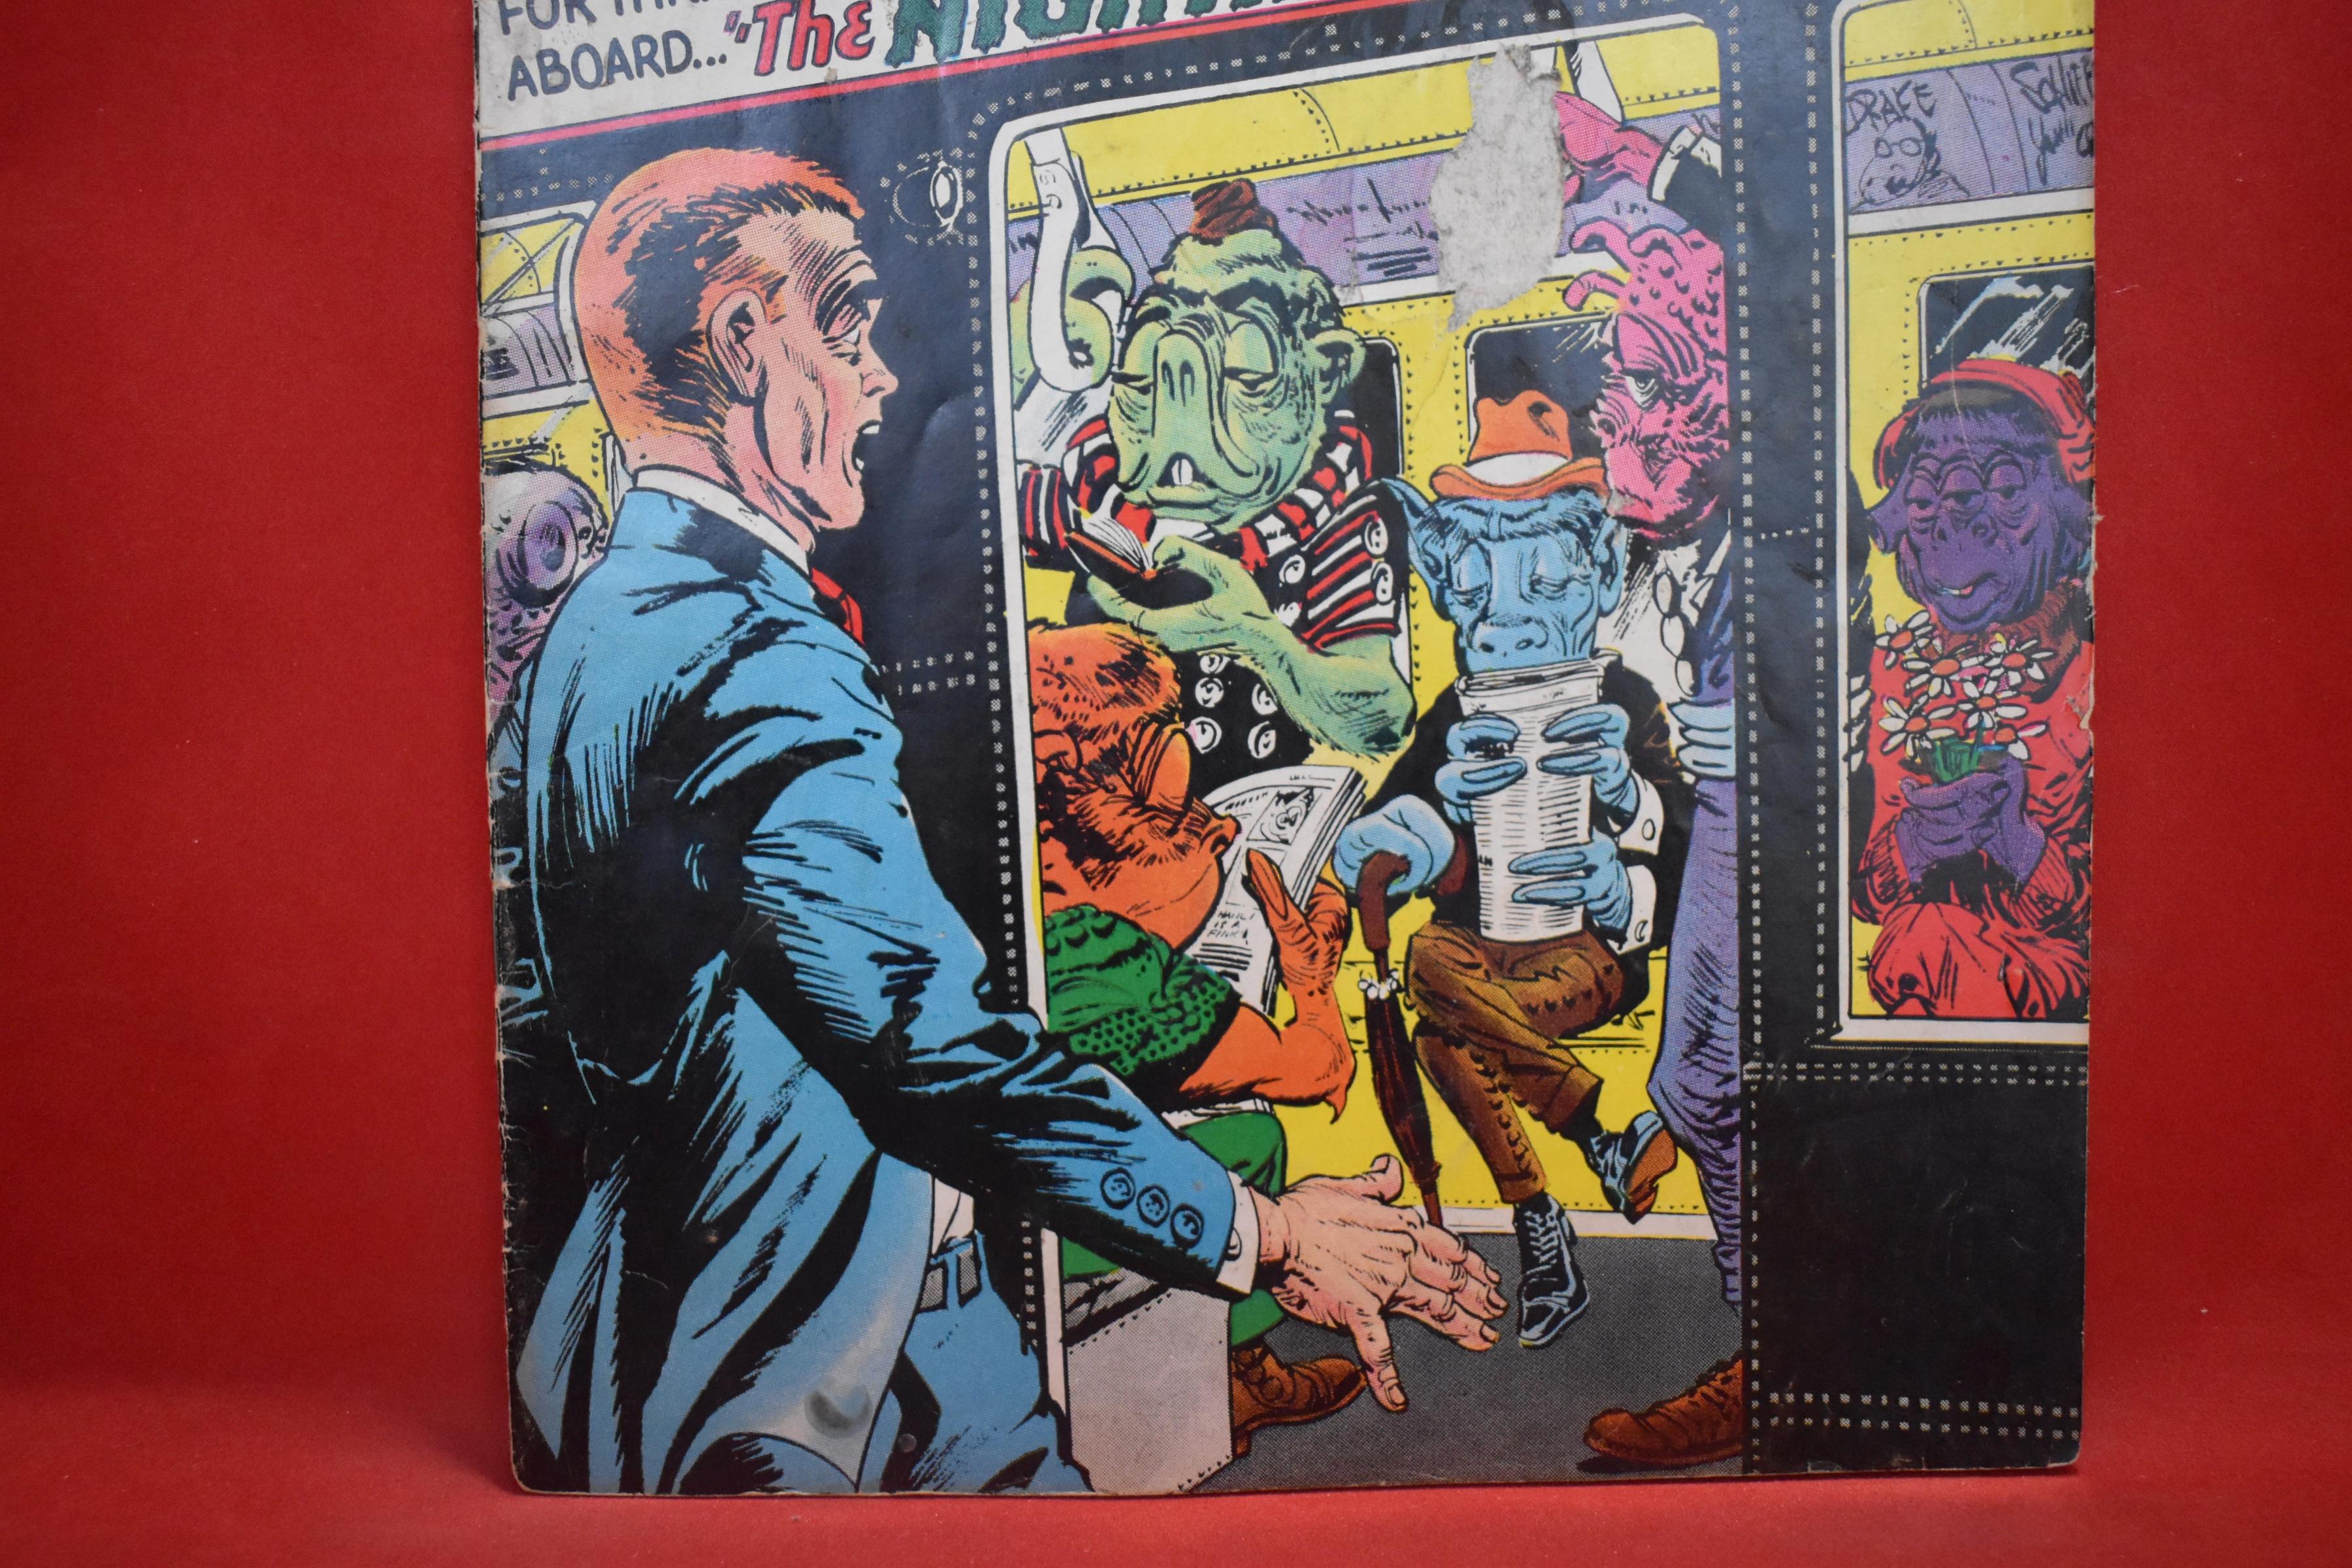 HOUSE OF MYSTERY #155 | THE NIGHTMARE EXPRESS - JACK SPARLING - 1965 | *COVER ISSUES - SEE PICS*